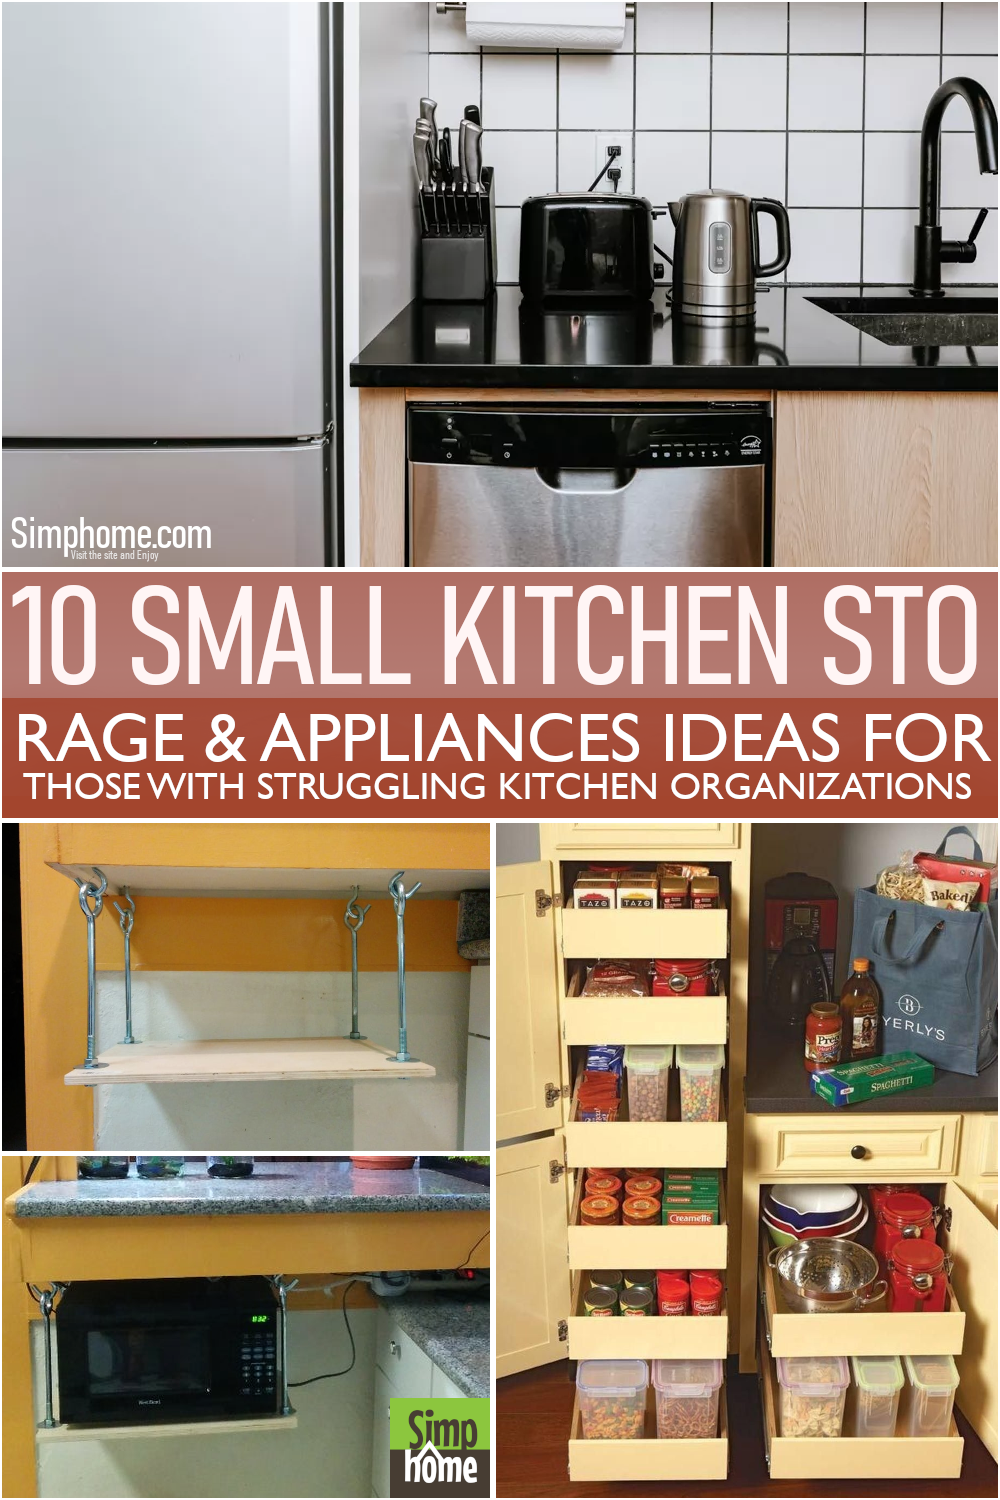 The 10 Small Kitchen Appliances Storage by Simphome